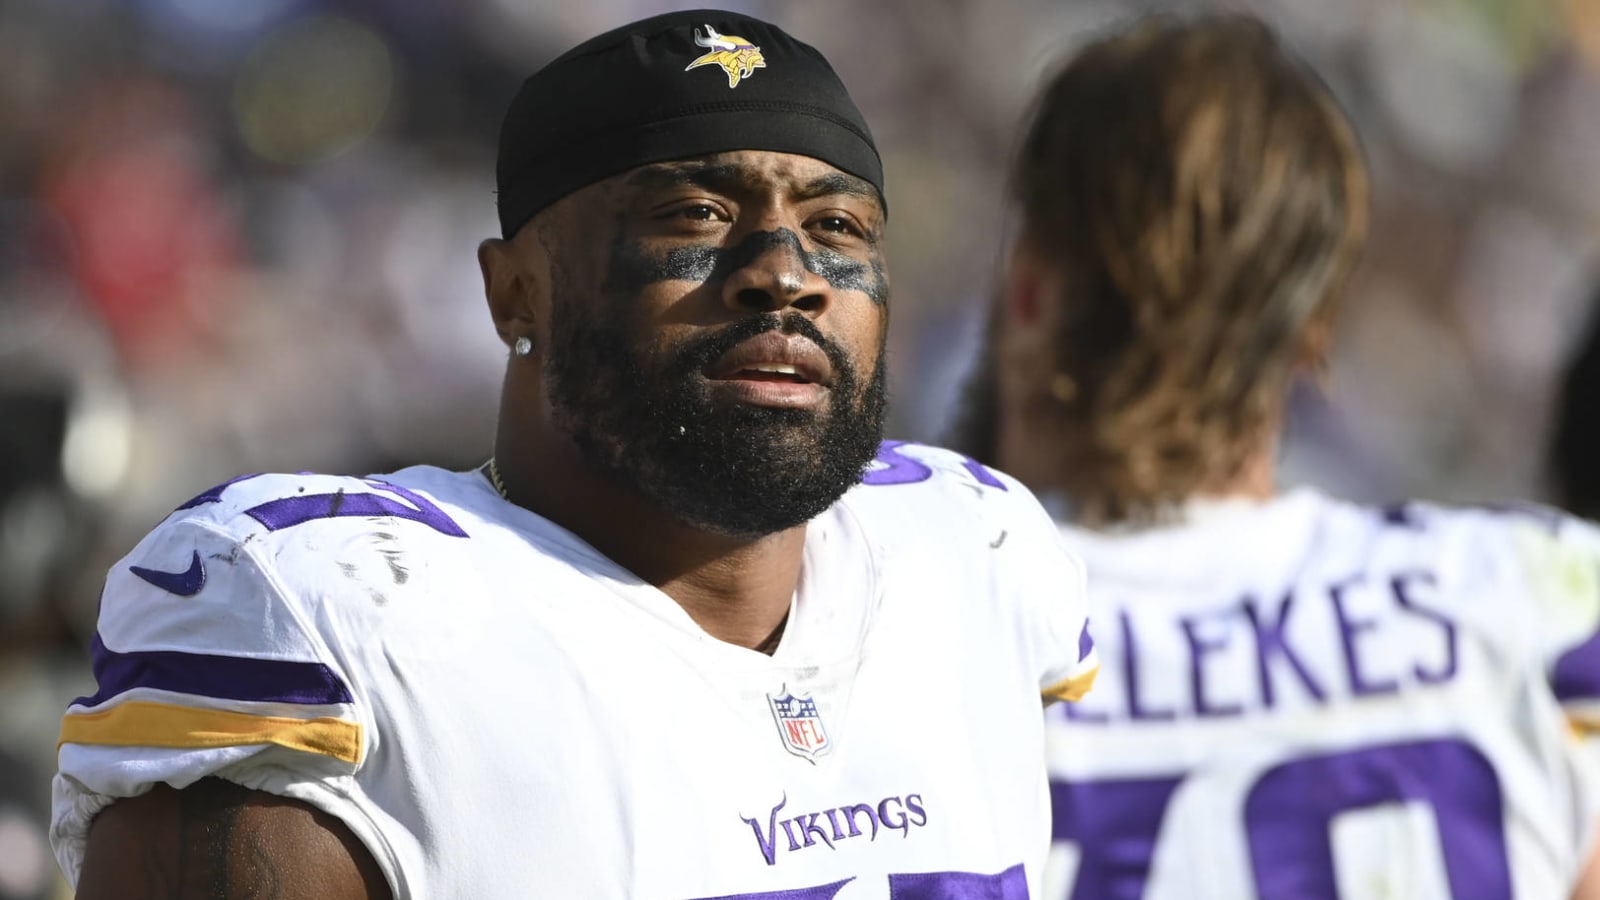 Everson Griffen has exited home, is 'getting the care he needs'